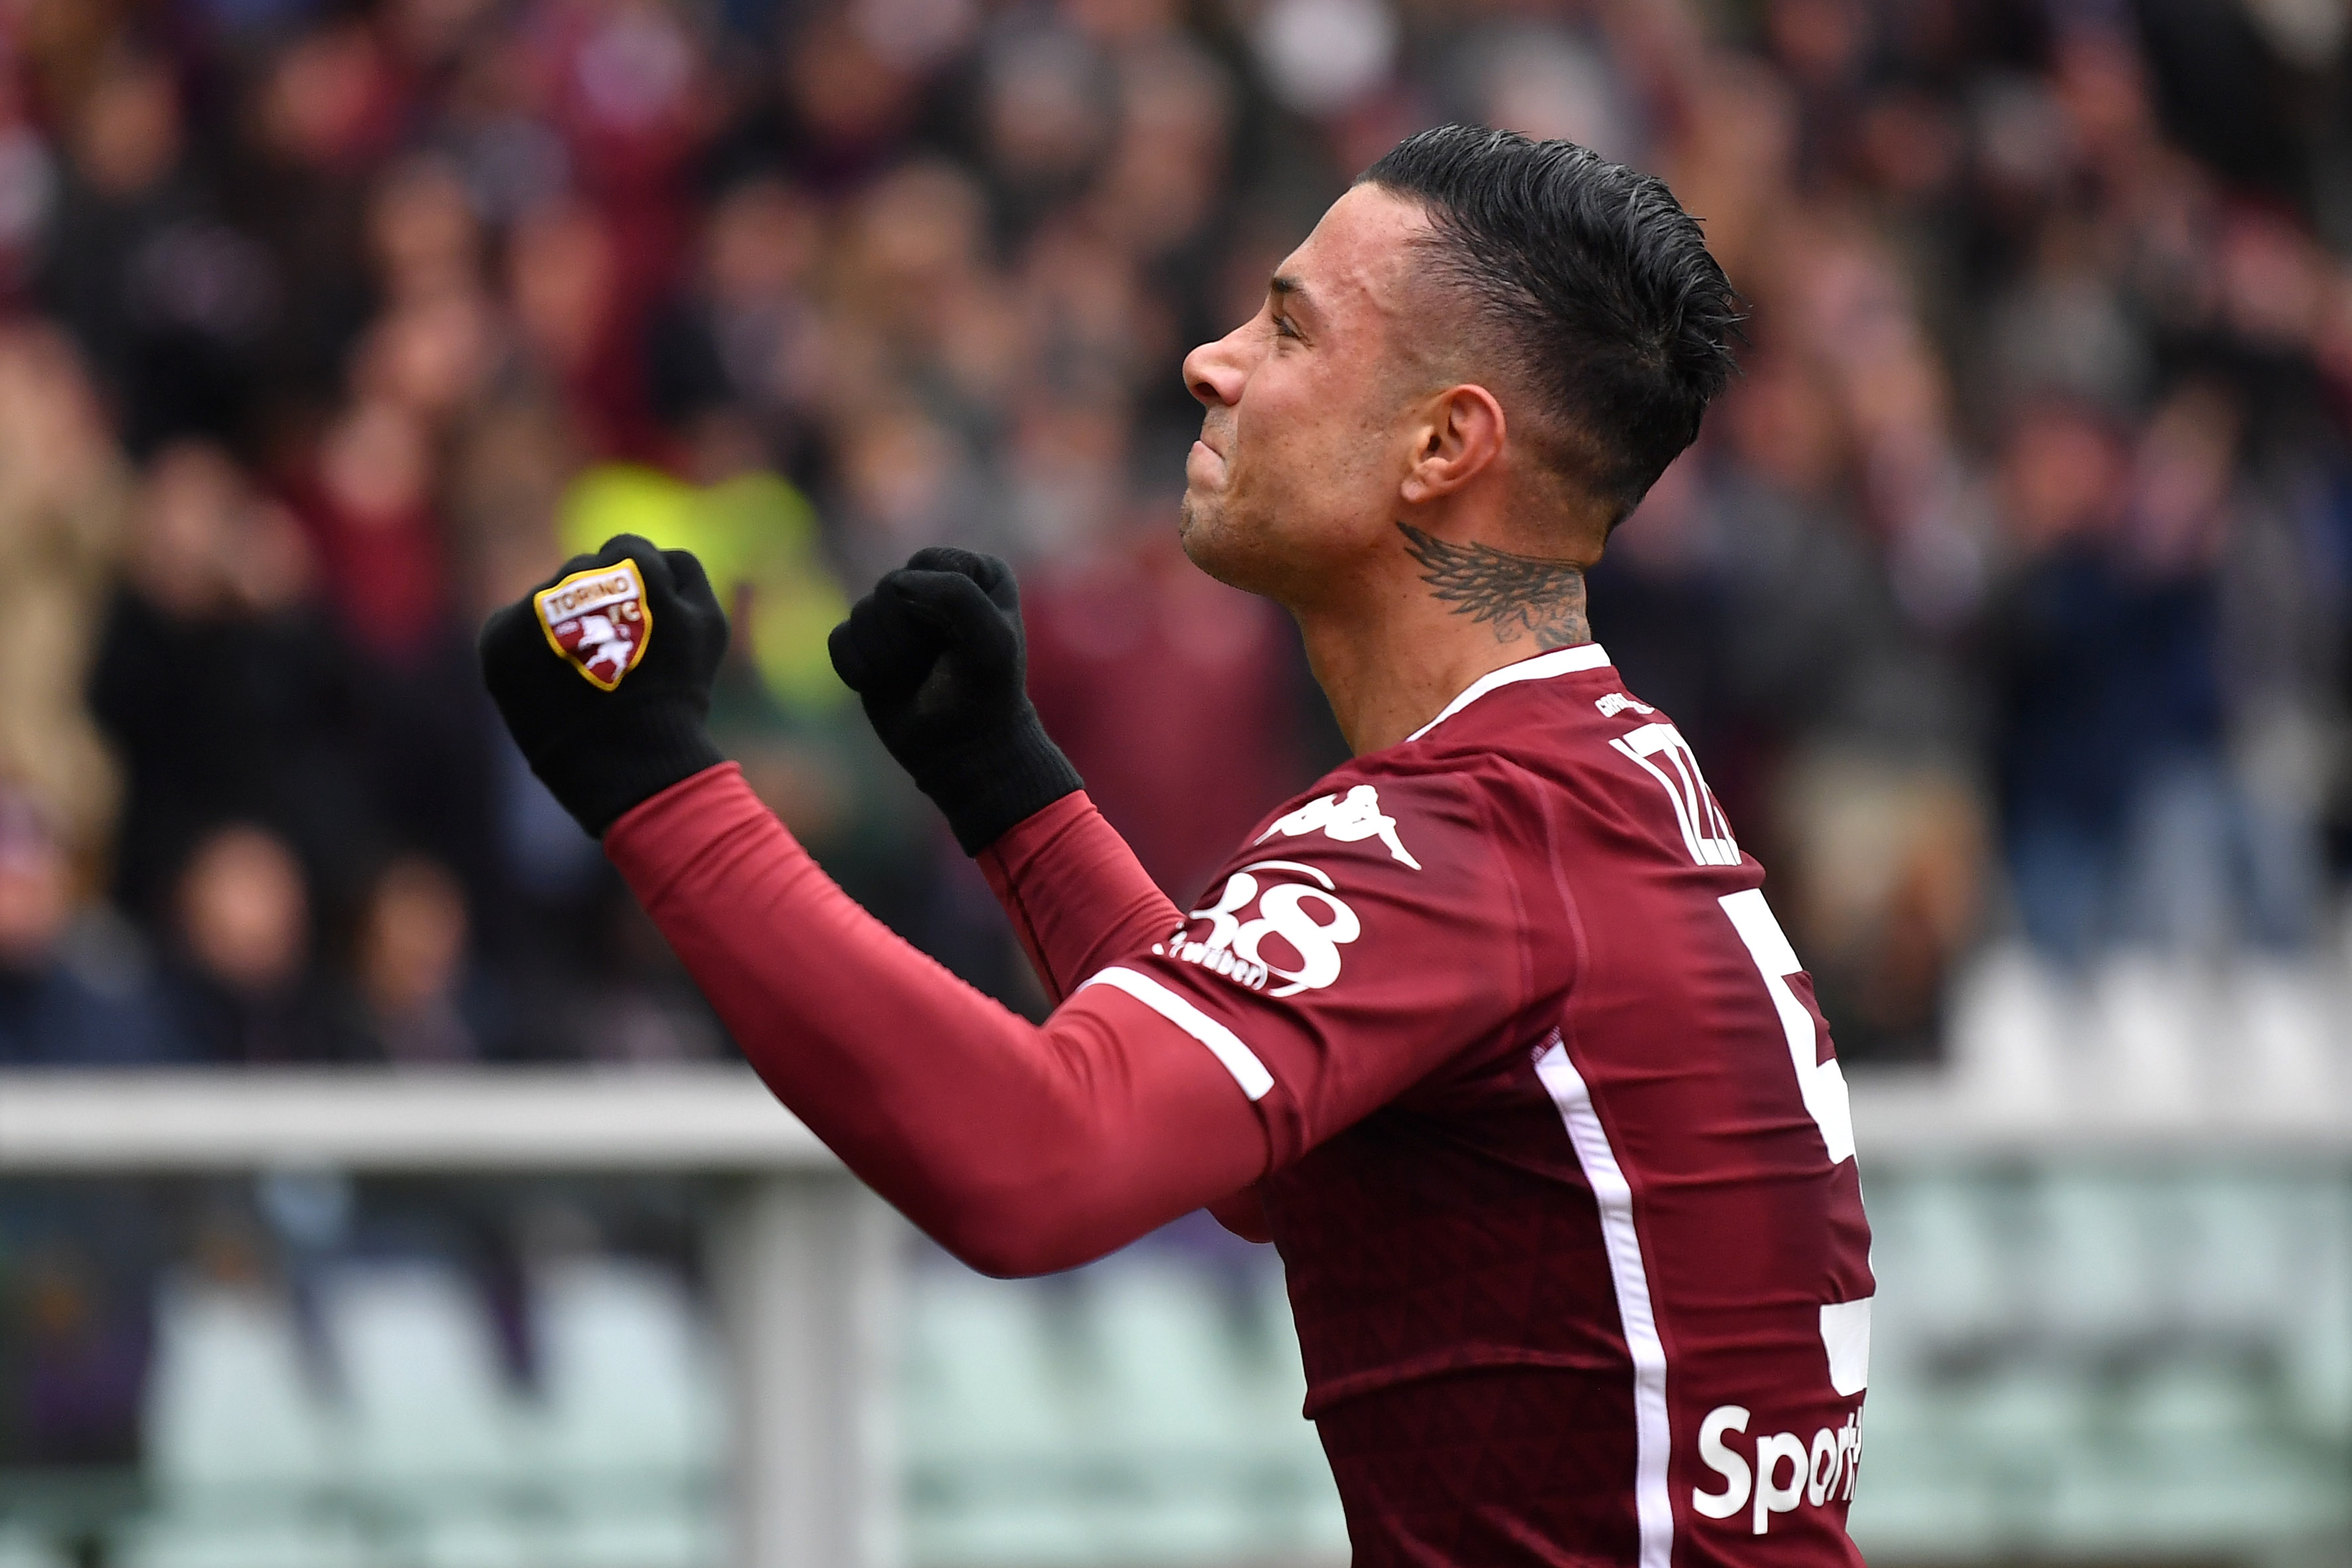 TURIN, ITALY - FEBRUARY 23:  Armando Izzo of Torino FC celebrates the opening goal during the Serie A match between Torino FC and Atalanta BC at Stadio Olimpico di Torino on February 23, 2019 in Turin, Italy.  (Photo by Valerio Pennicino/Getty Images)